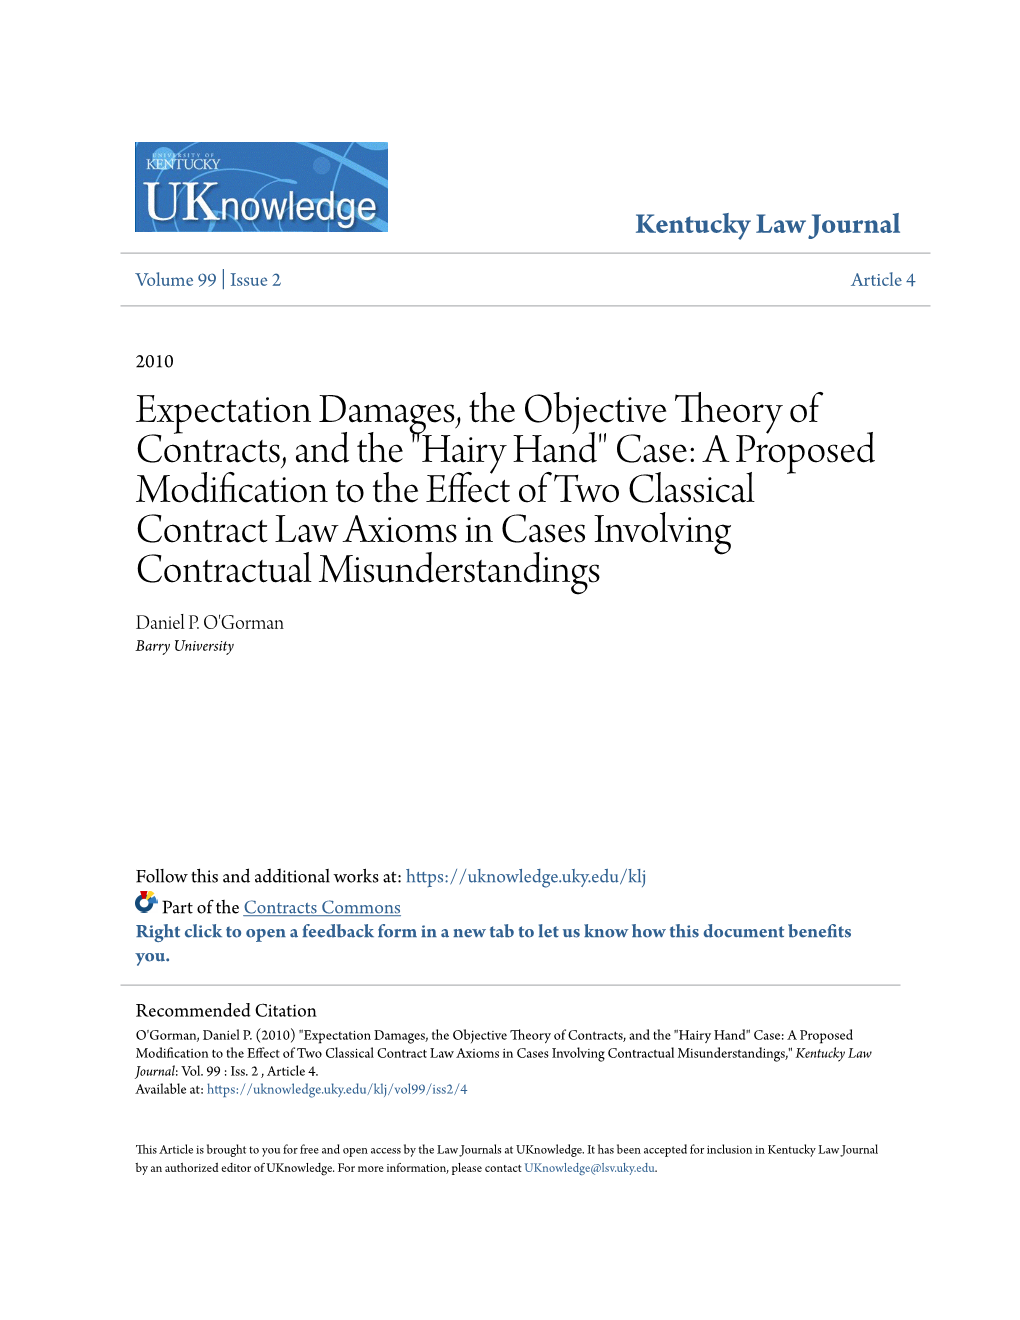 Expectation Damages, the Objective Theory of Contracts, And